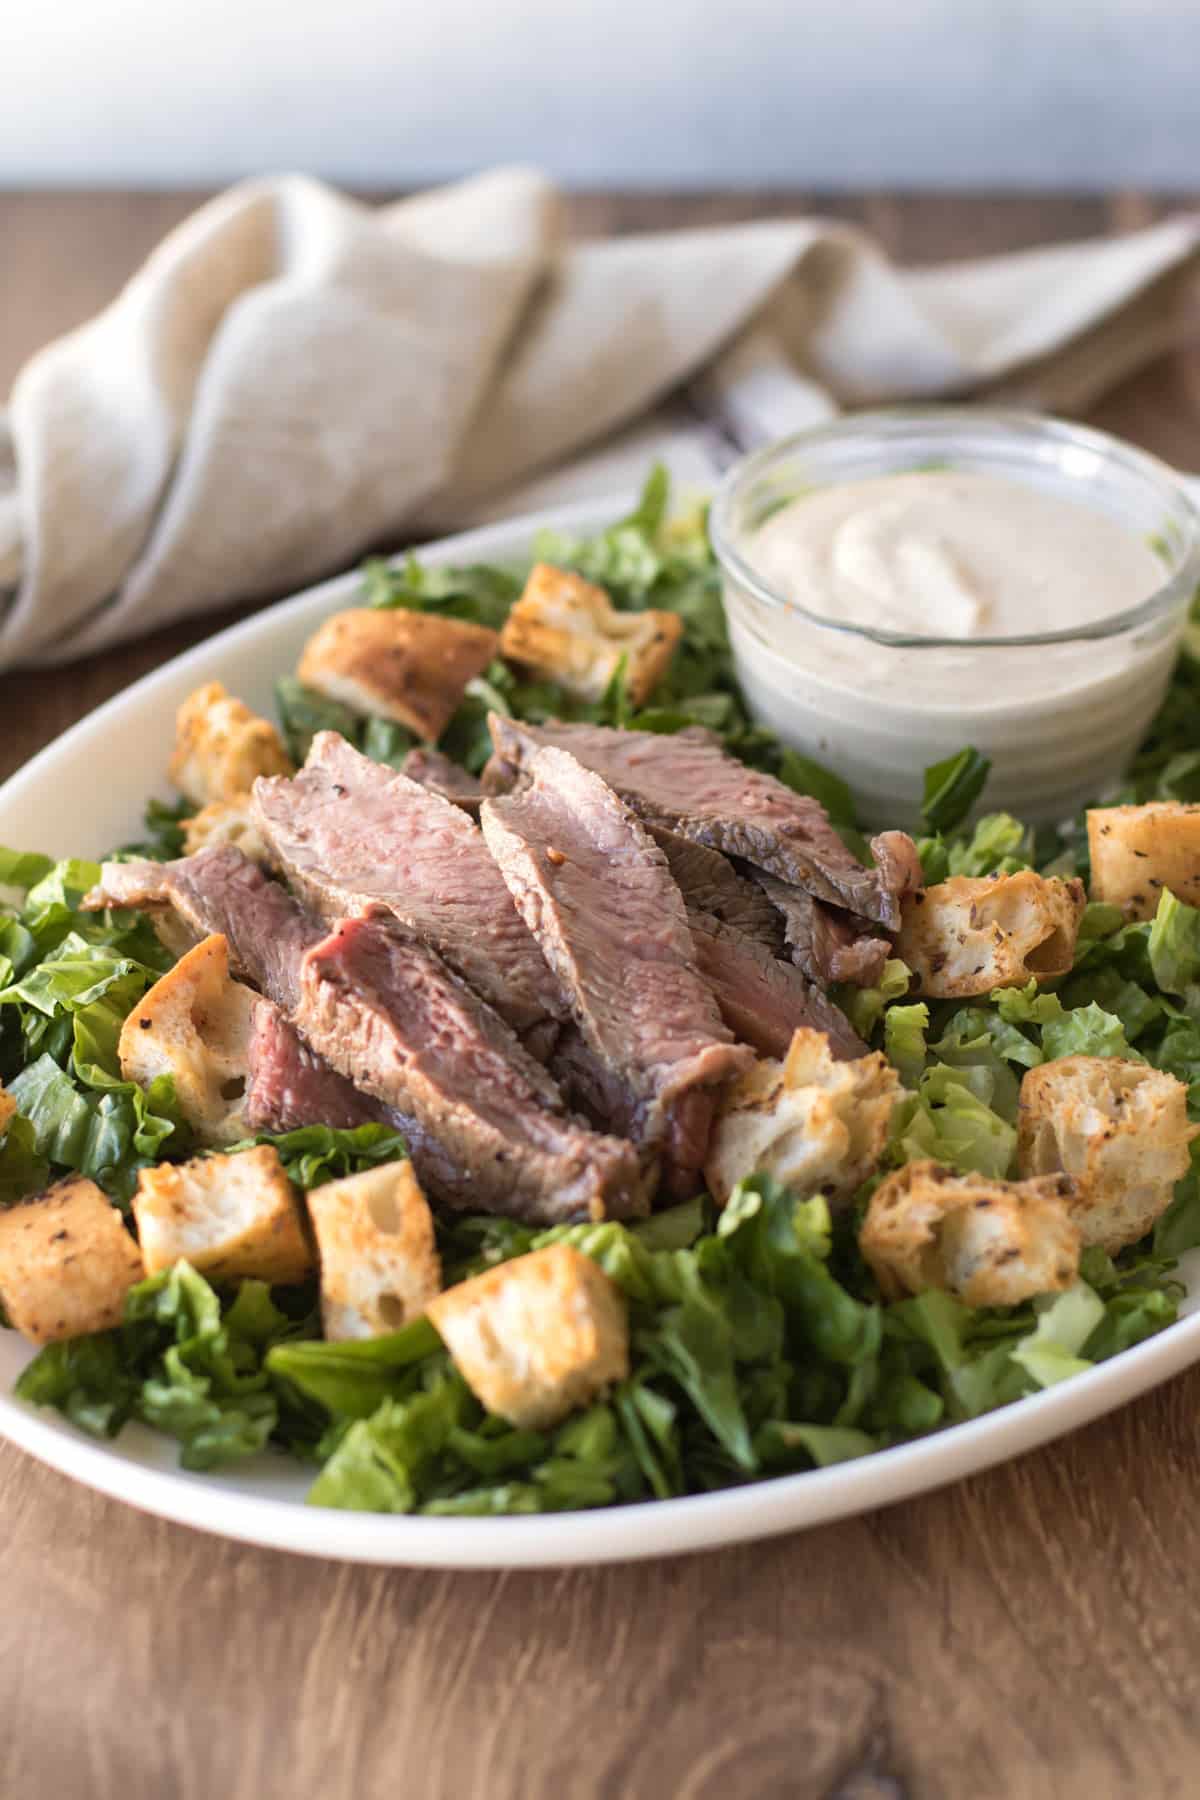 romaine lettuce topped with ciabatta croutons, steak, with a bowl of dressing.